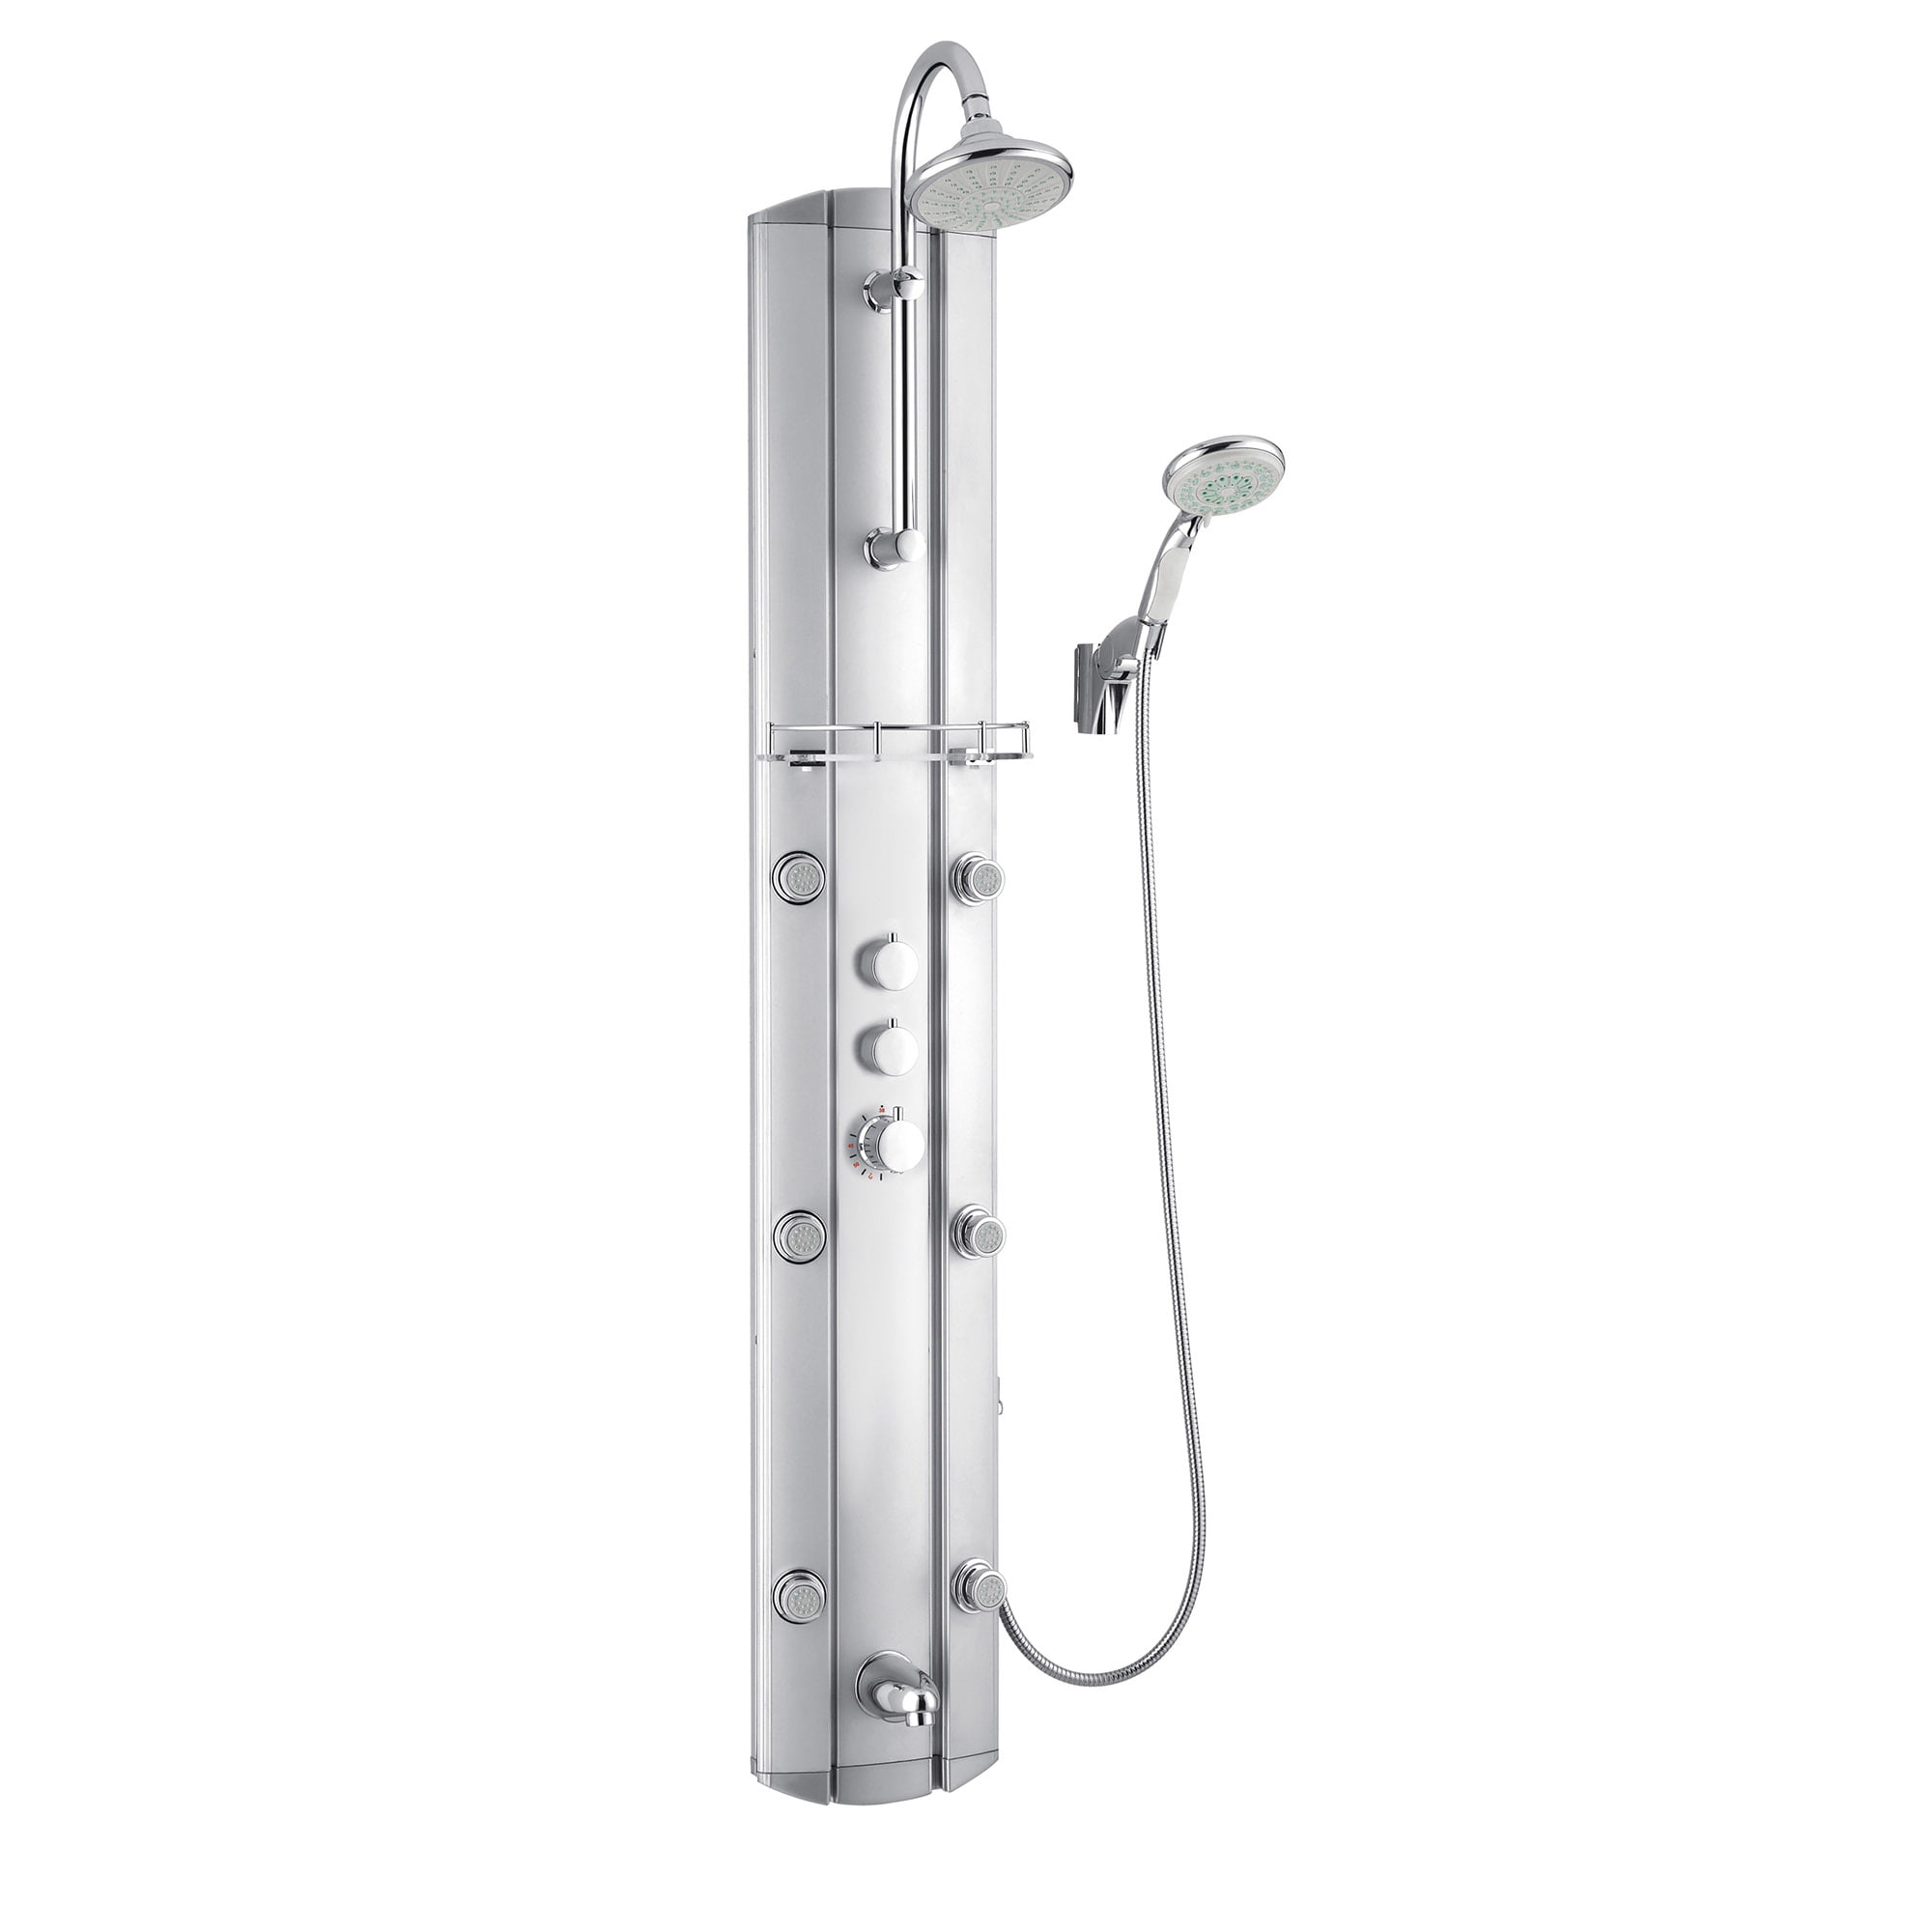 DreamLine Hydrotherapy Body Shower Column with Shower Accessory Holder, Anodized Aluminum Body In Satin Finish